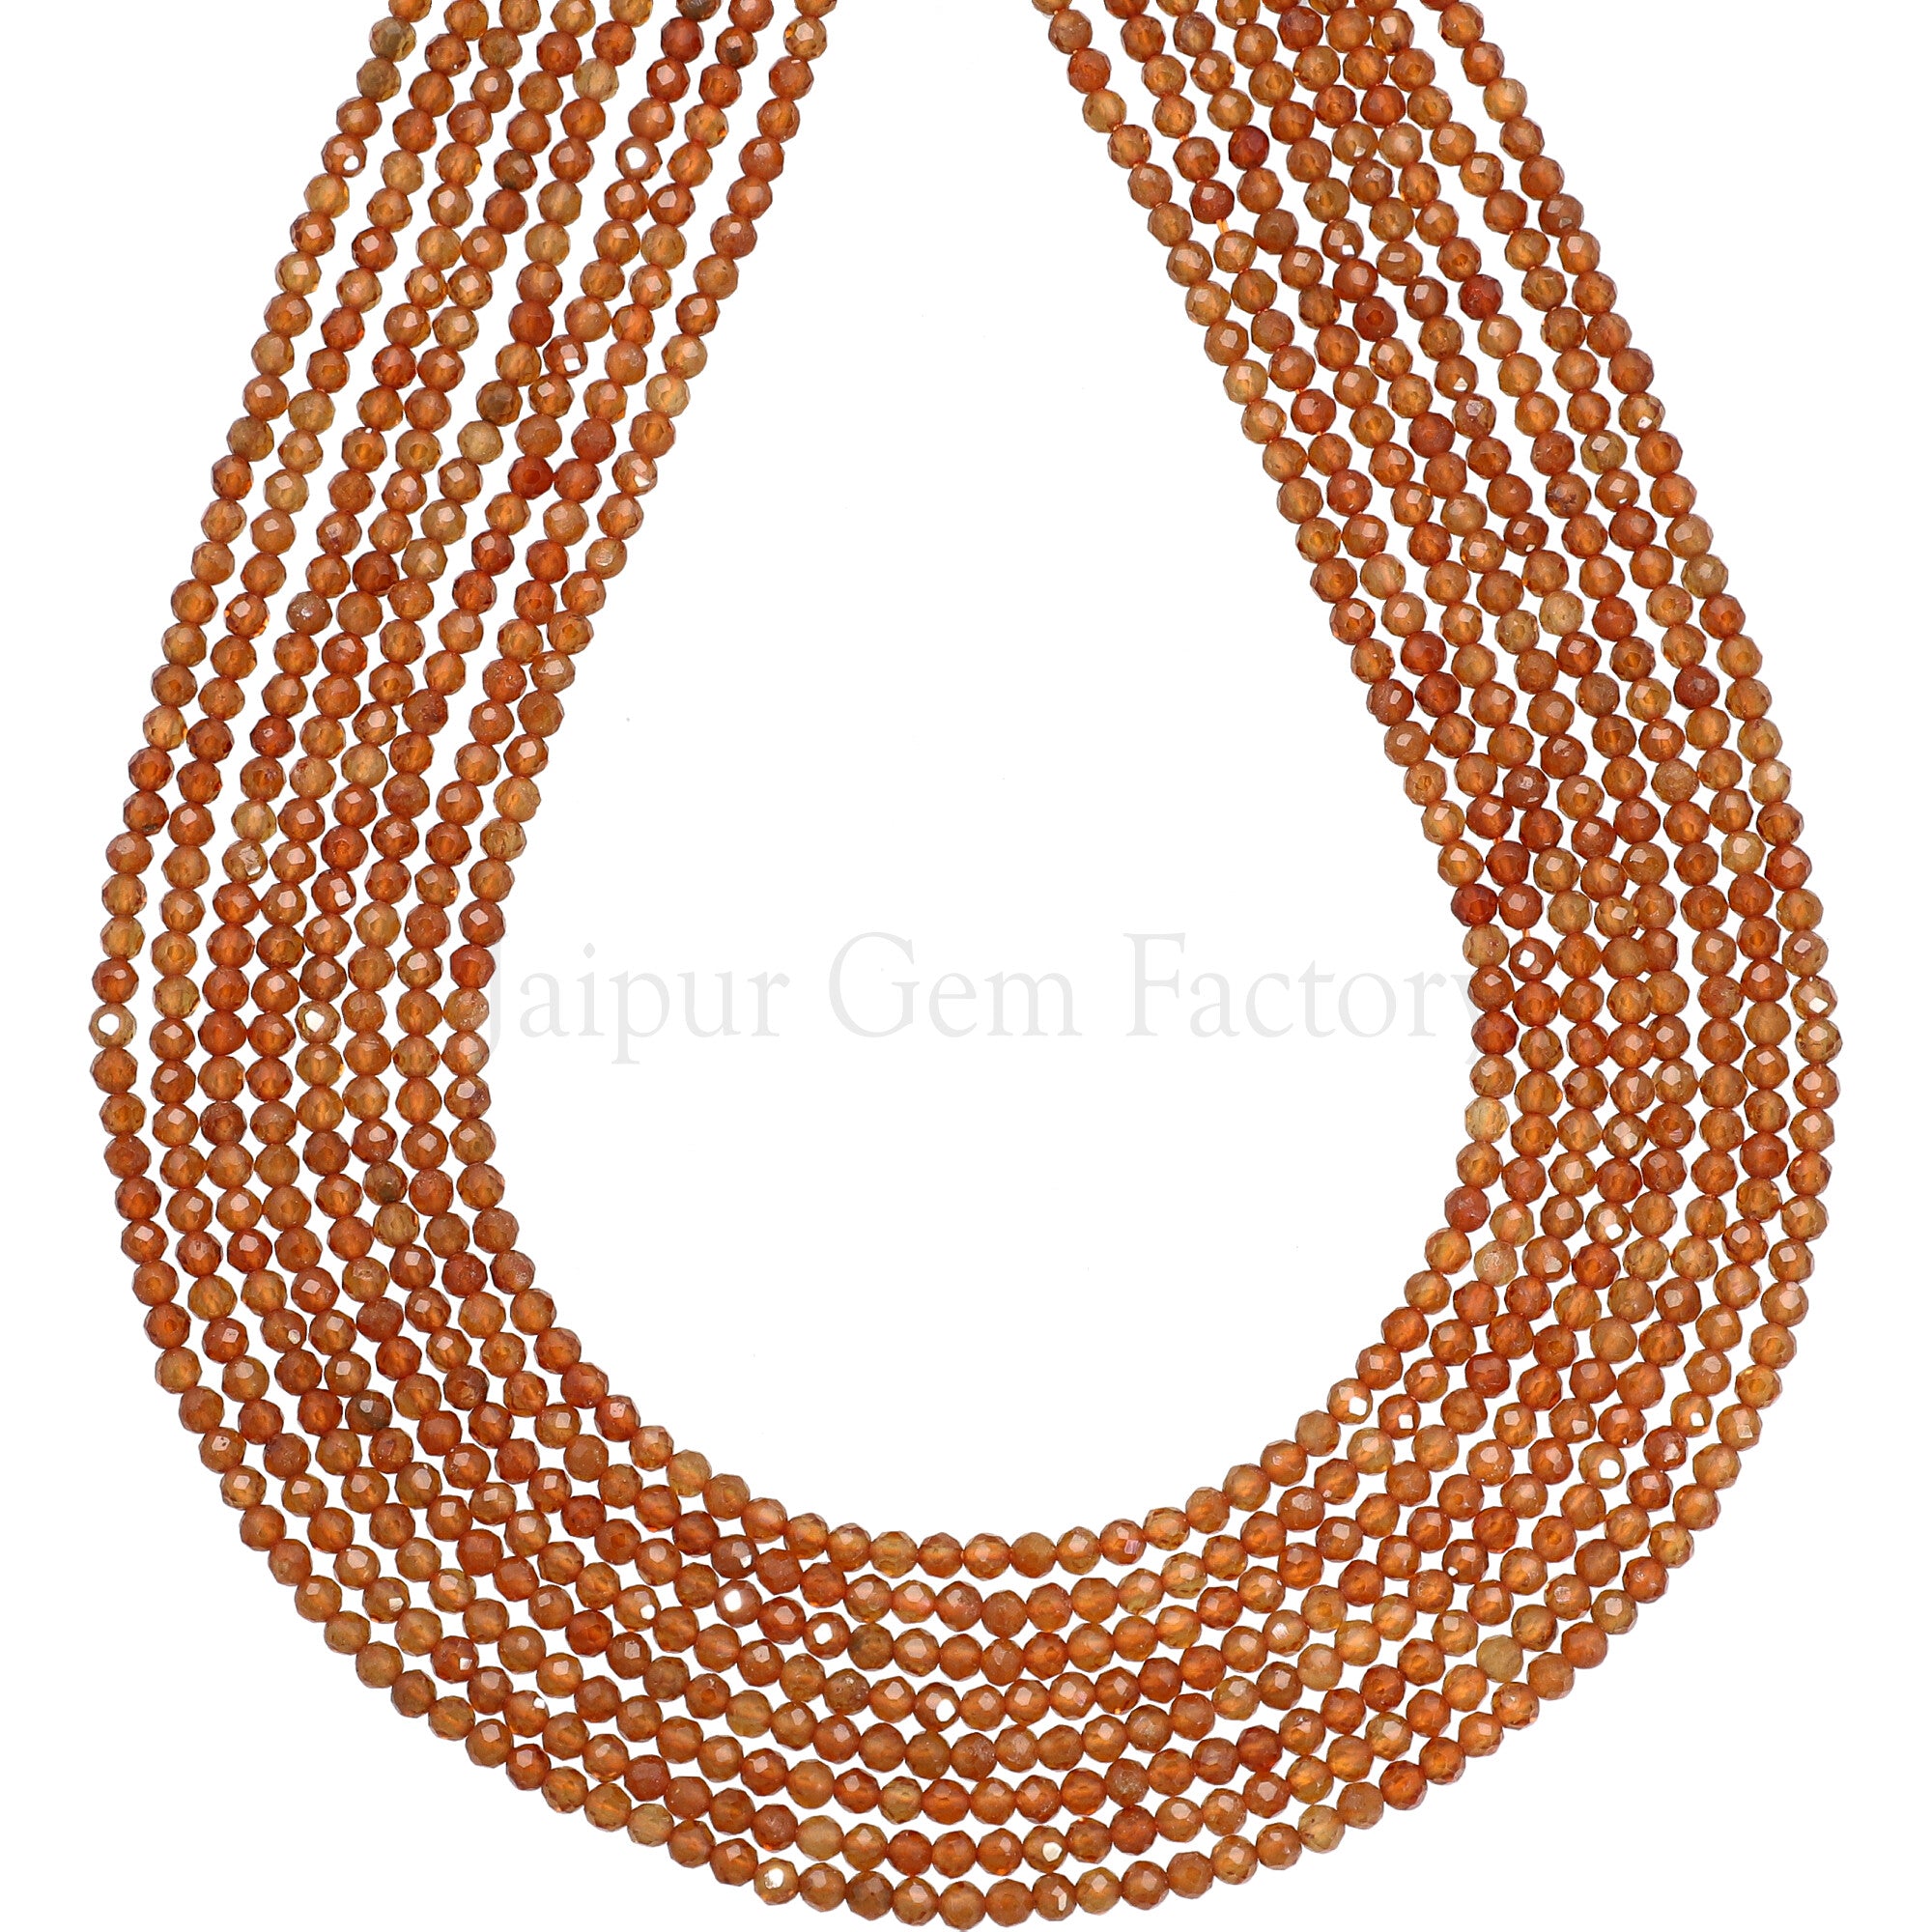 2.5 MM Hessonite Garnet Faceted Round Beads 15 Inches Strand